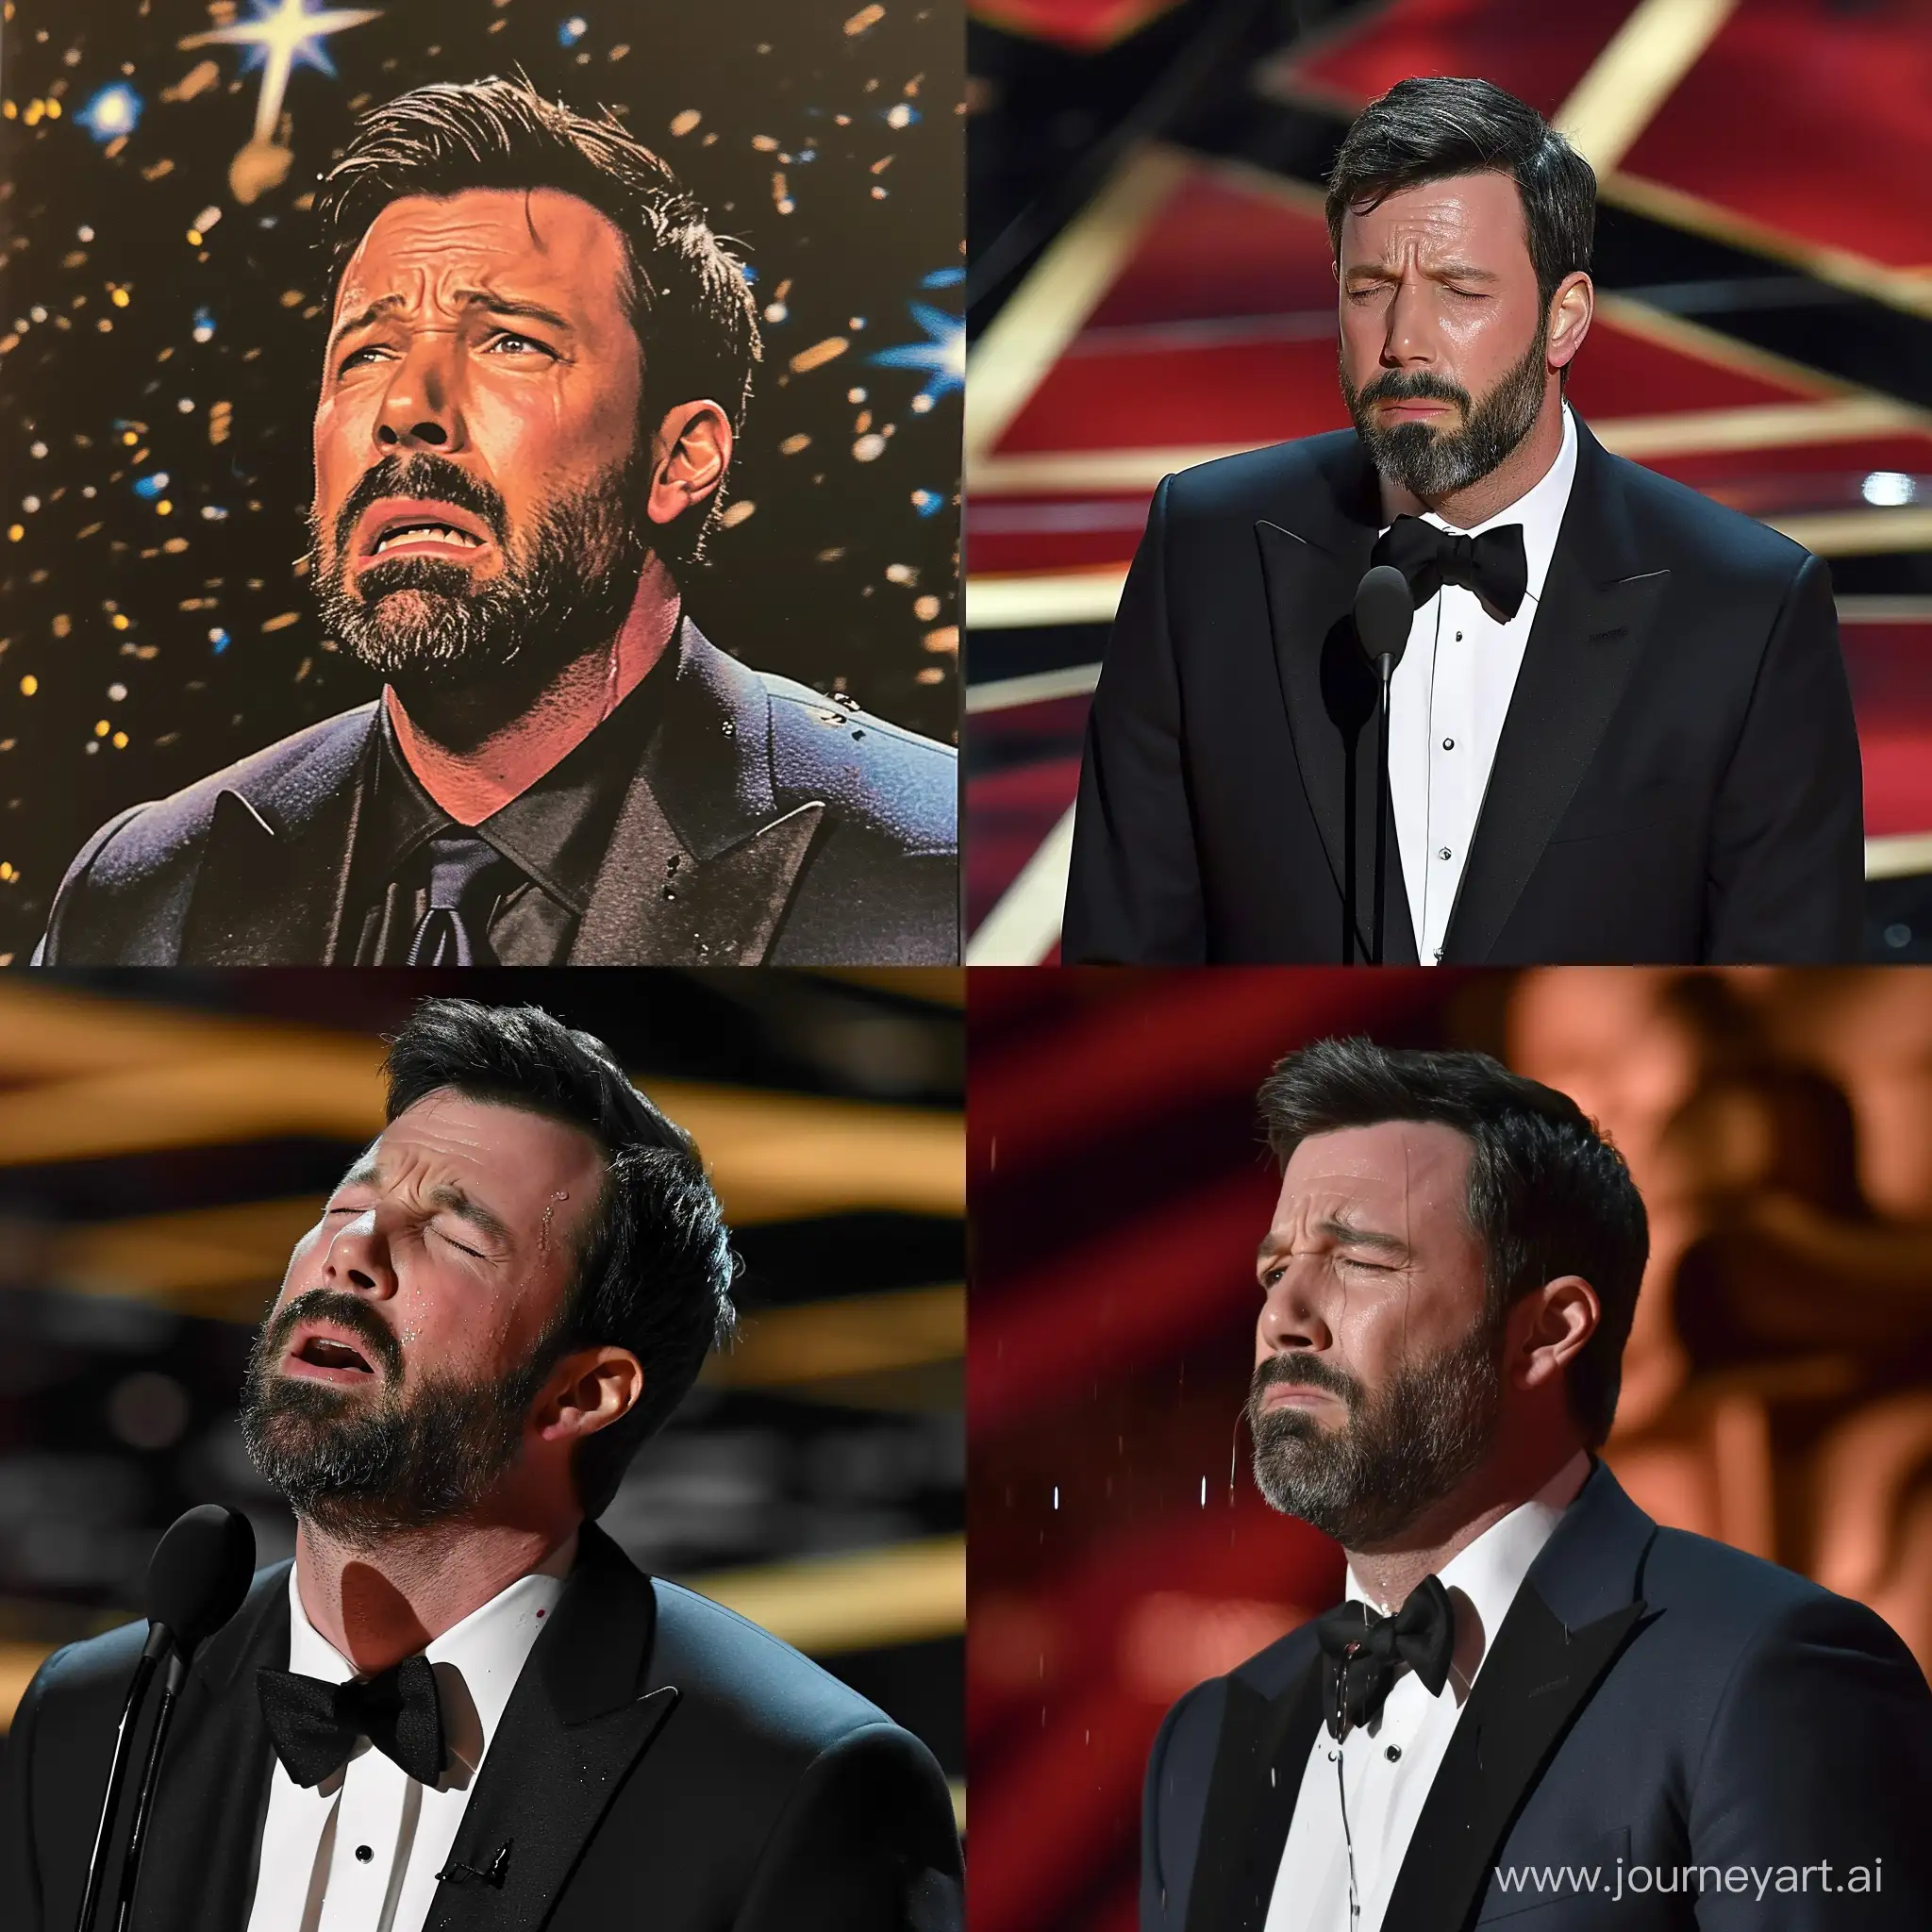 Ben Affleck crying at the Oscars

90's nicklodeon comic style, 

